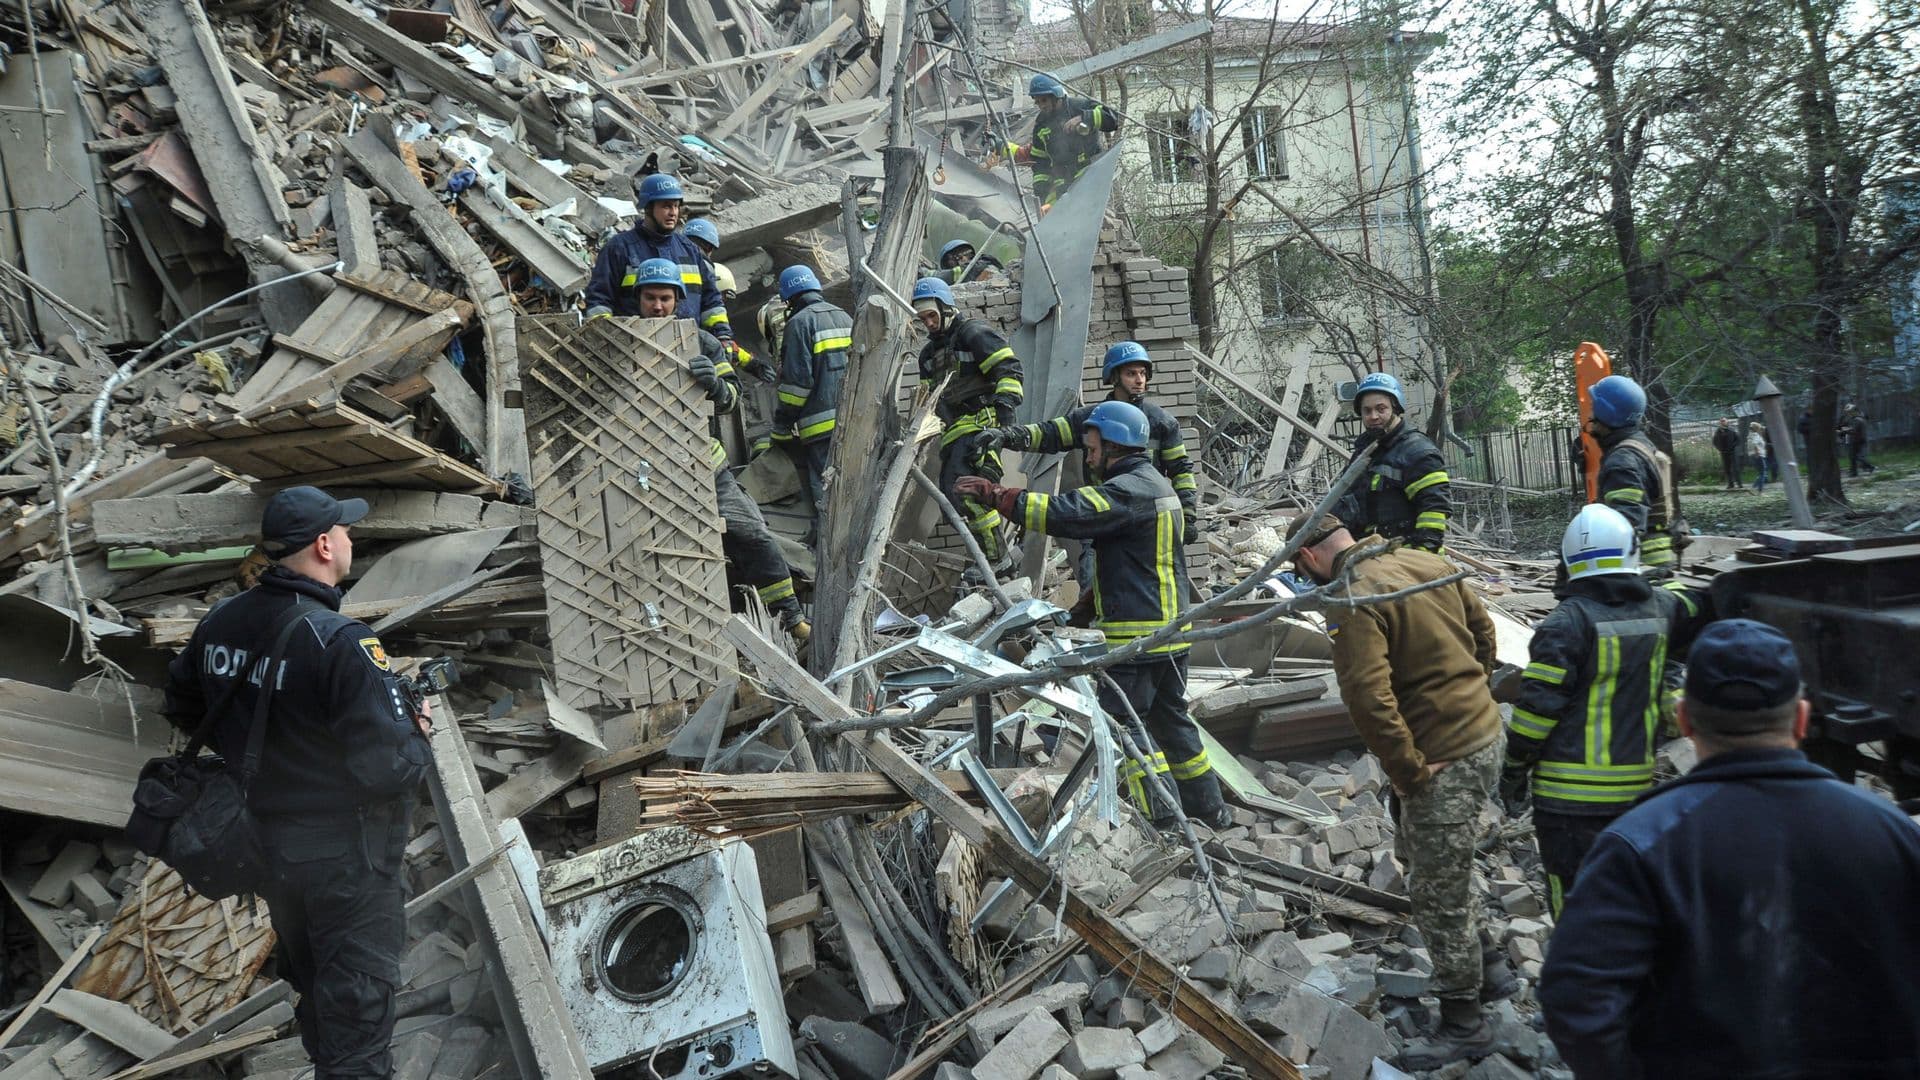 Rescuers work at the site of a residential building heavily damaged by a Russian missile strike in Zaporizhzhia